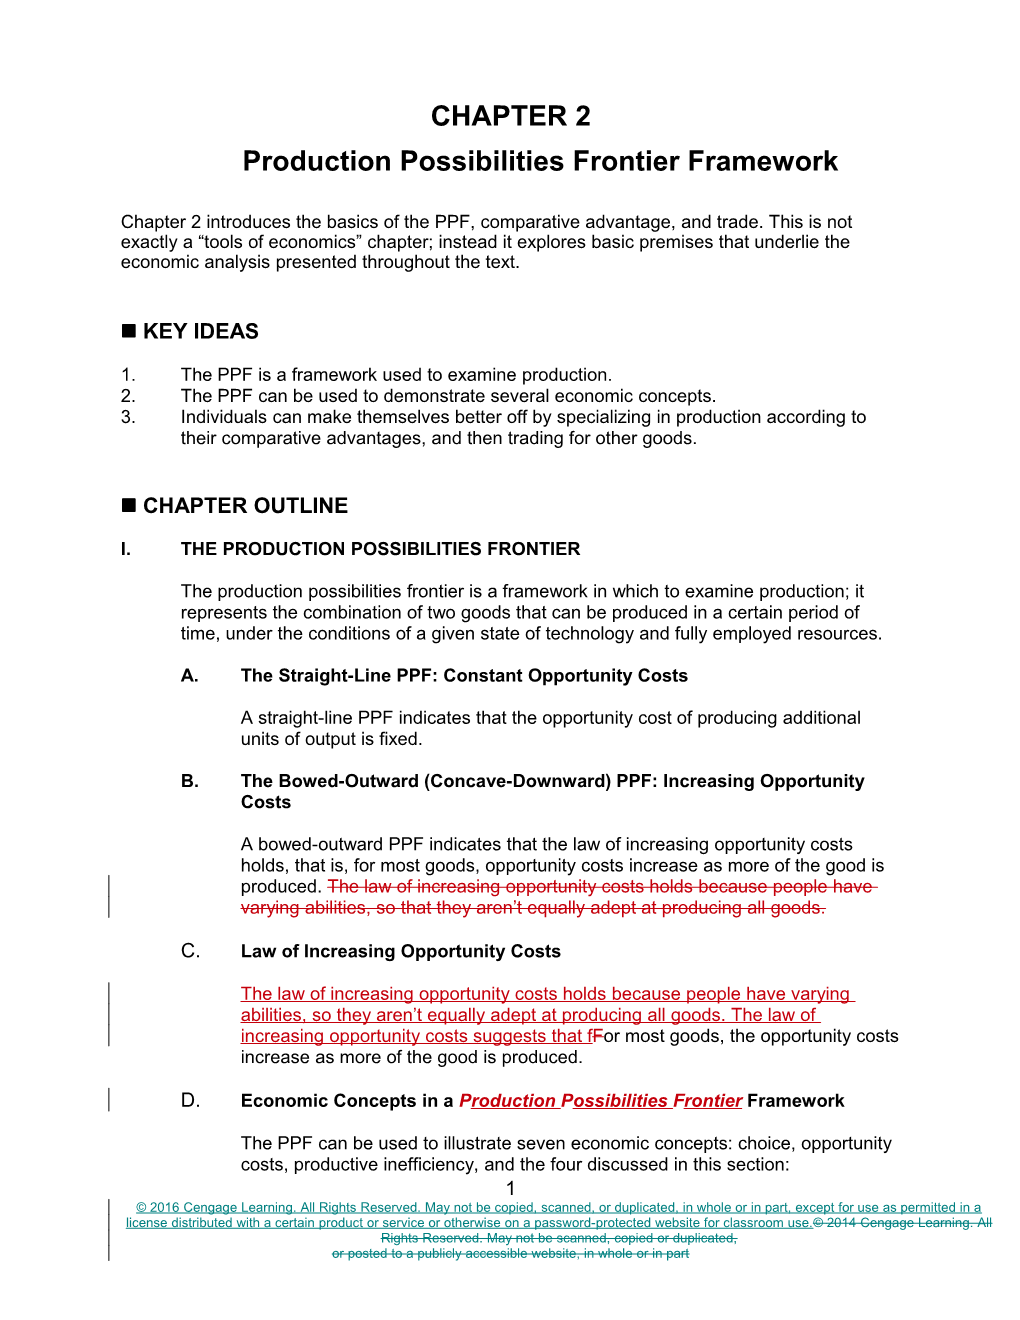 Production Possibilities Frontier Framework